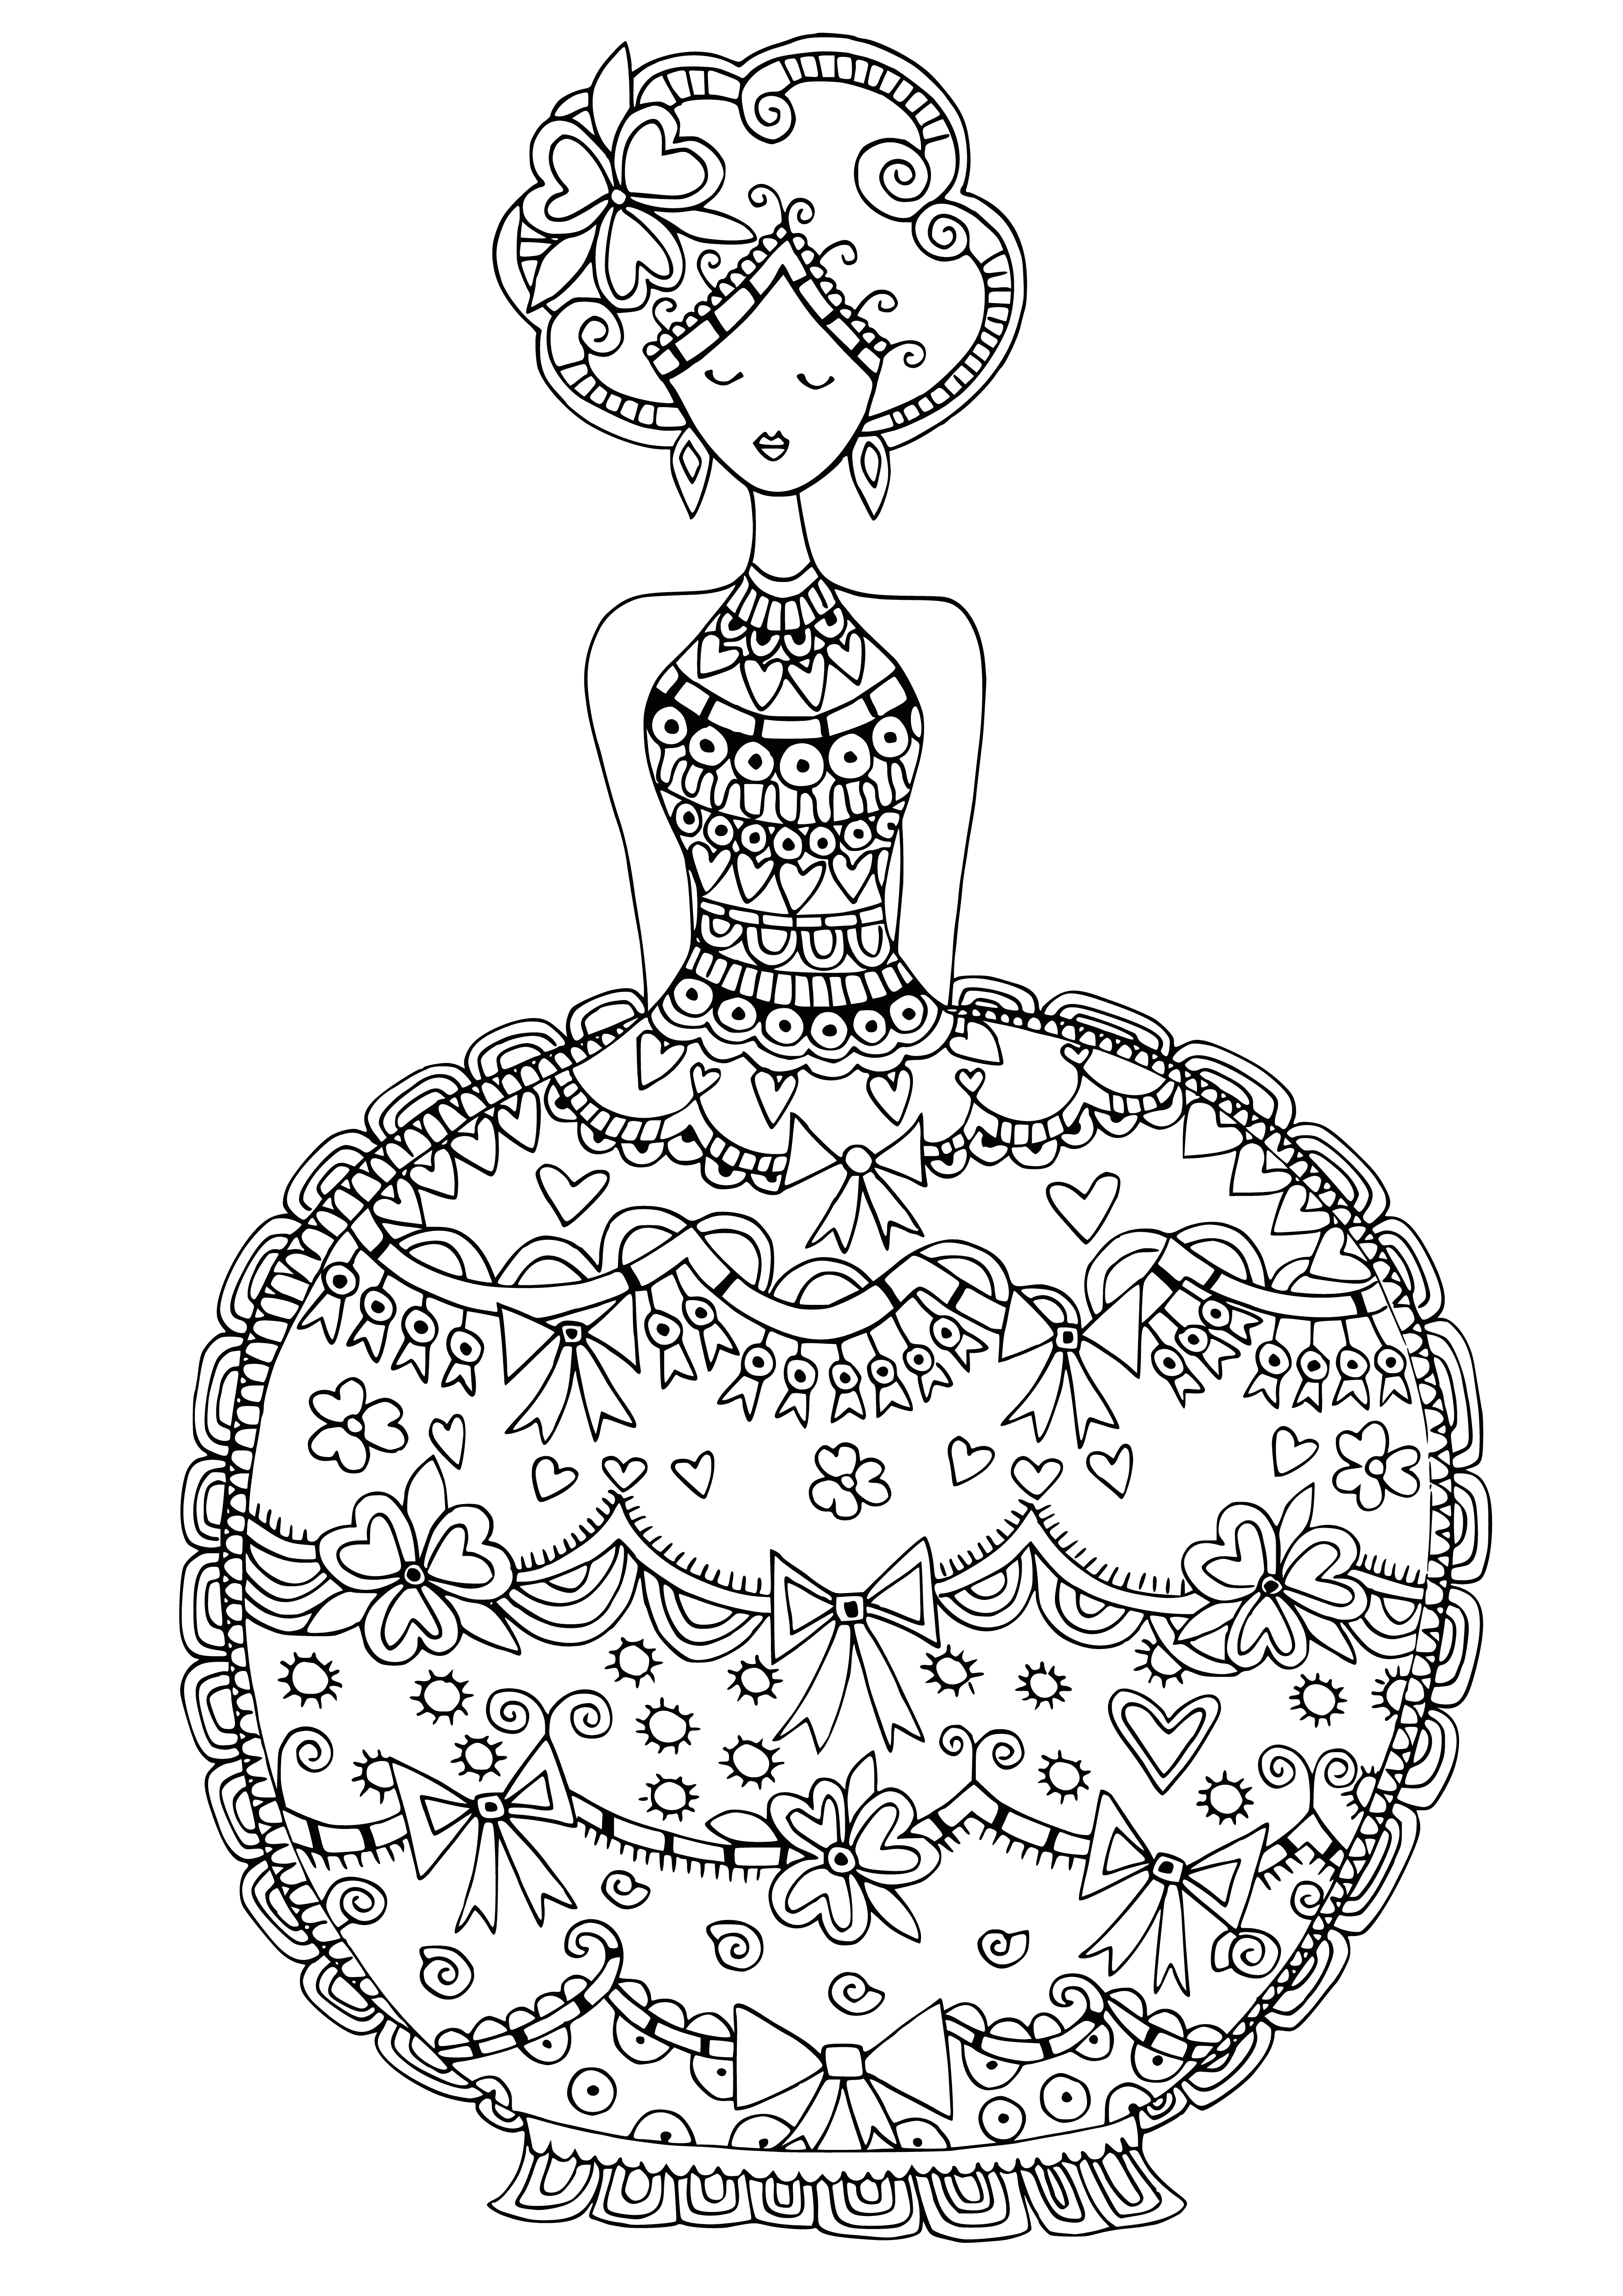 coloring page: Beautiful young lady standing in a field of flowers, looking happy. Bright & cheerful colors make this adult coloring page perfect for antistress.